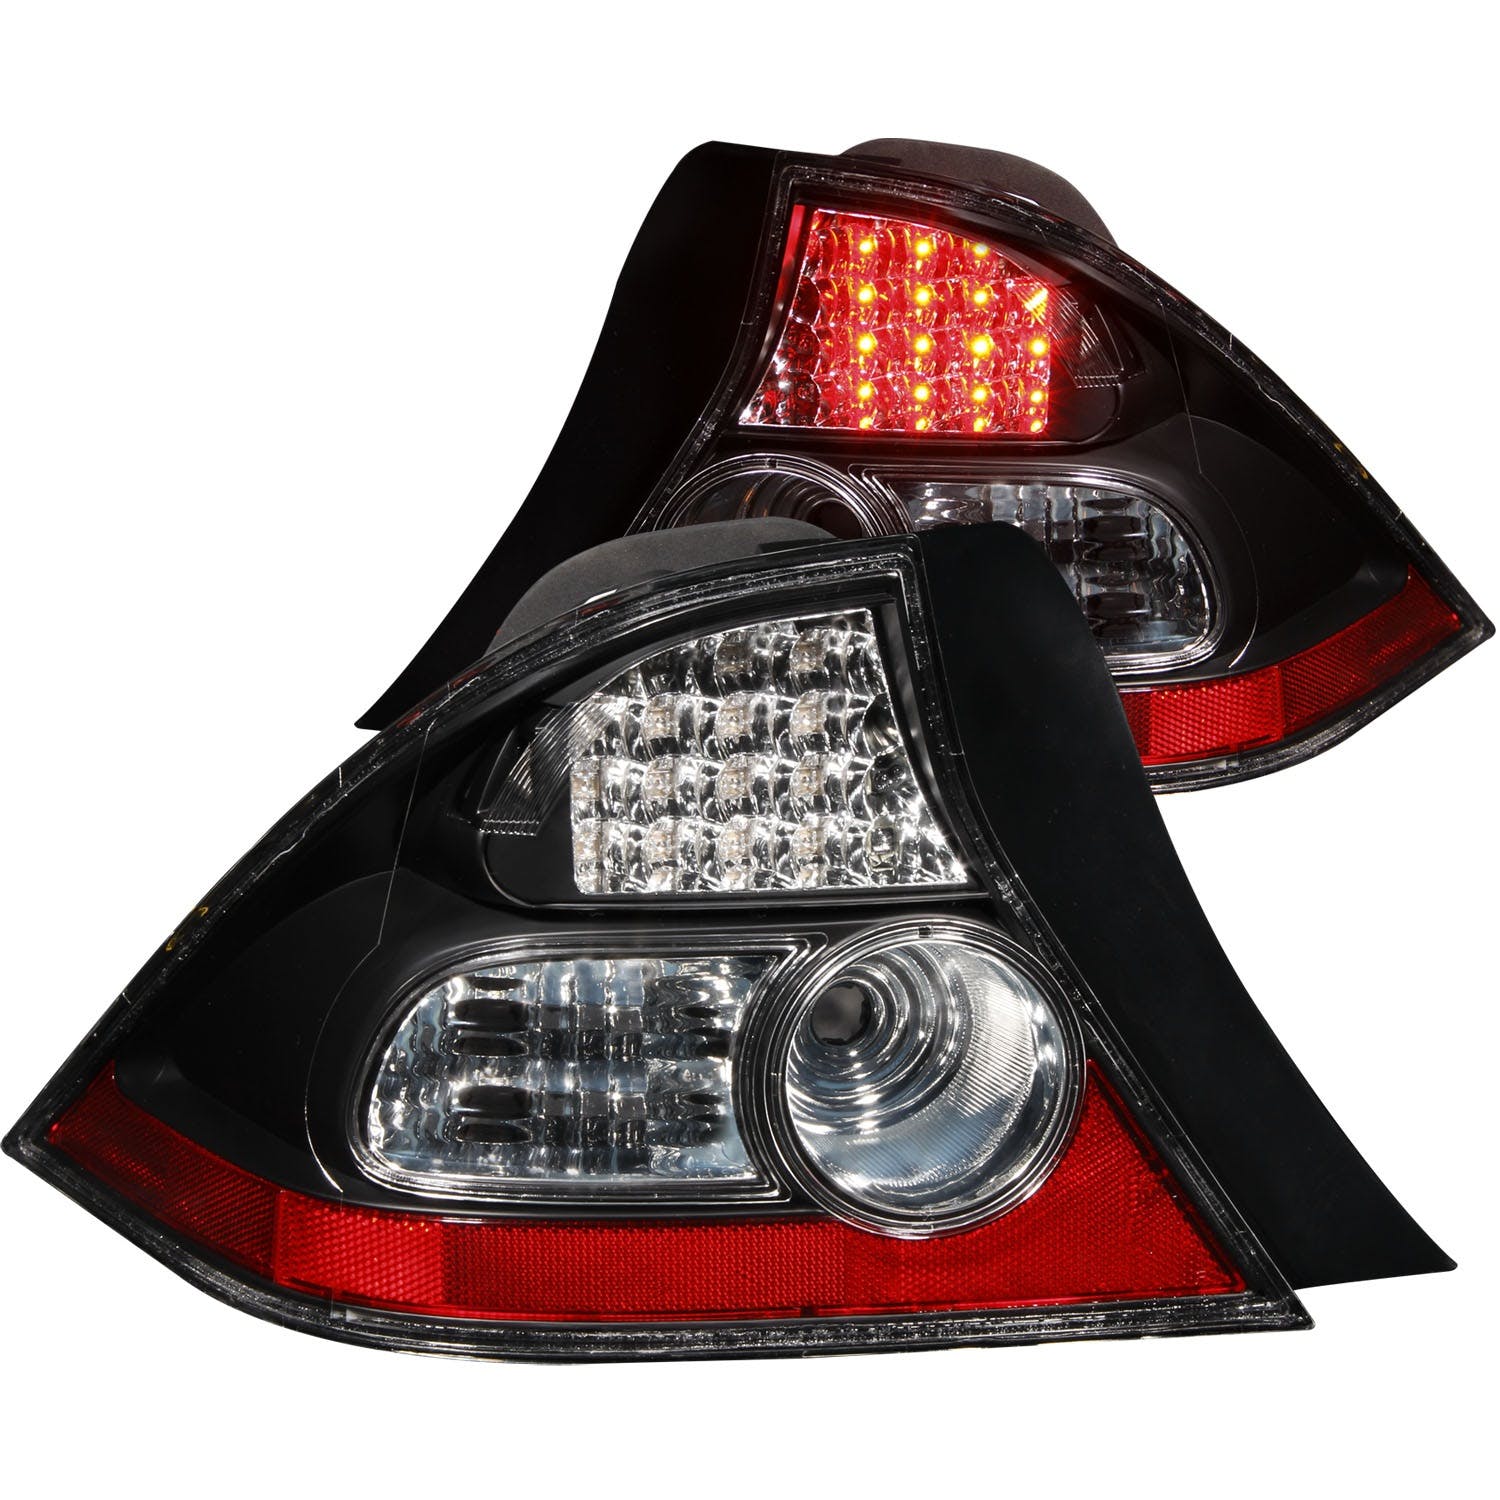 AnzoUSA 321035 LED Taillights Black